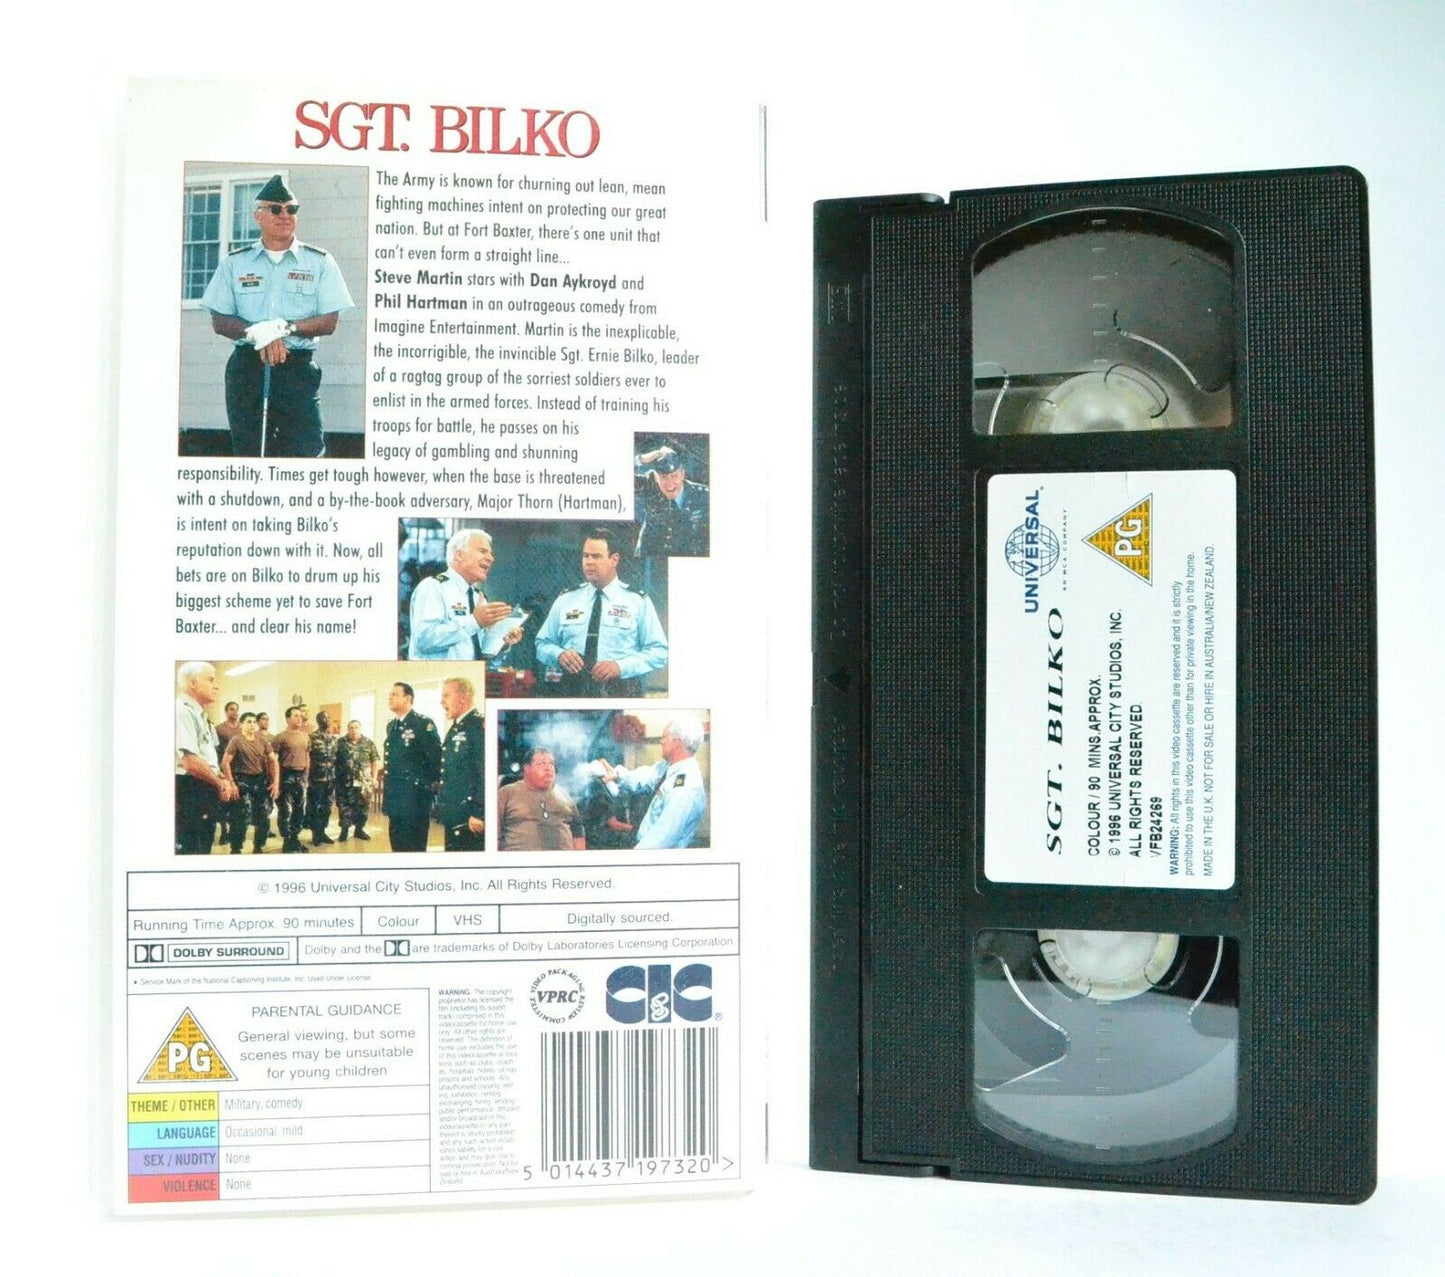 Sgt. Bliko: Based On The Phil Silvers Show - (1996) Comedy - Steve Martin - VHS-